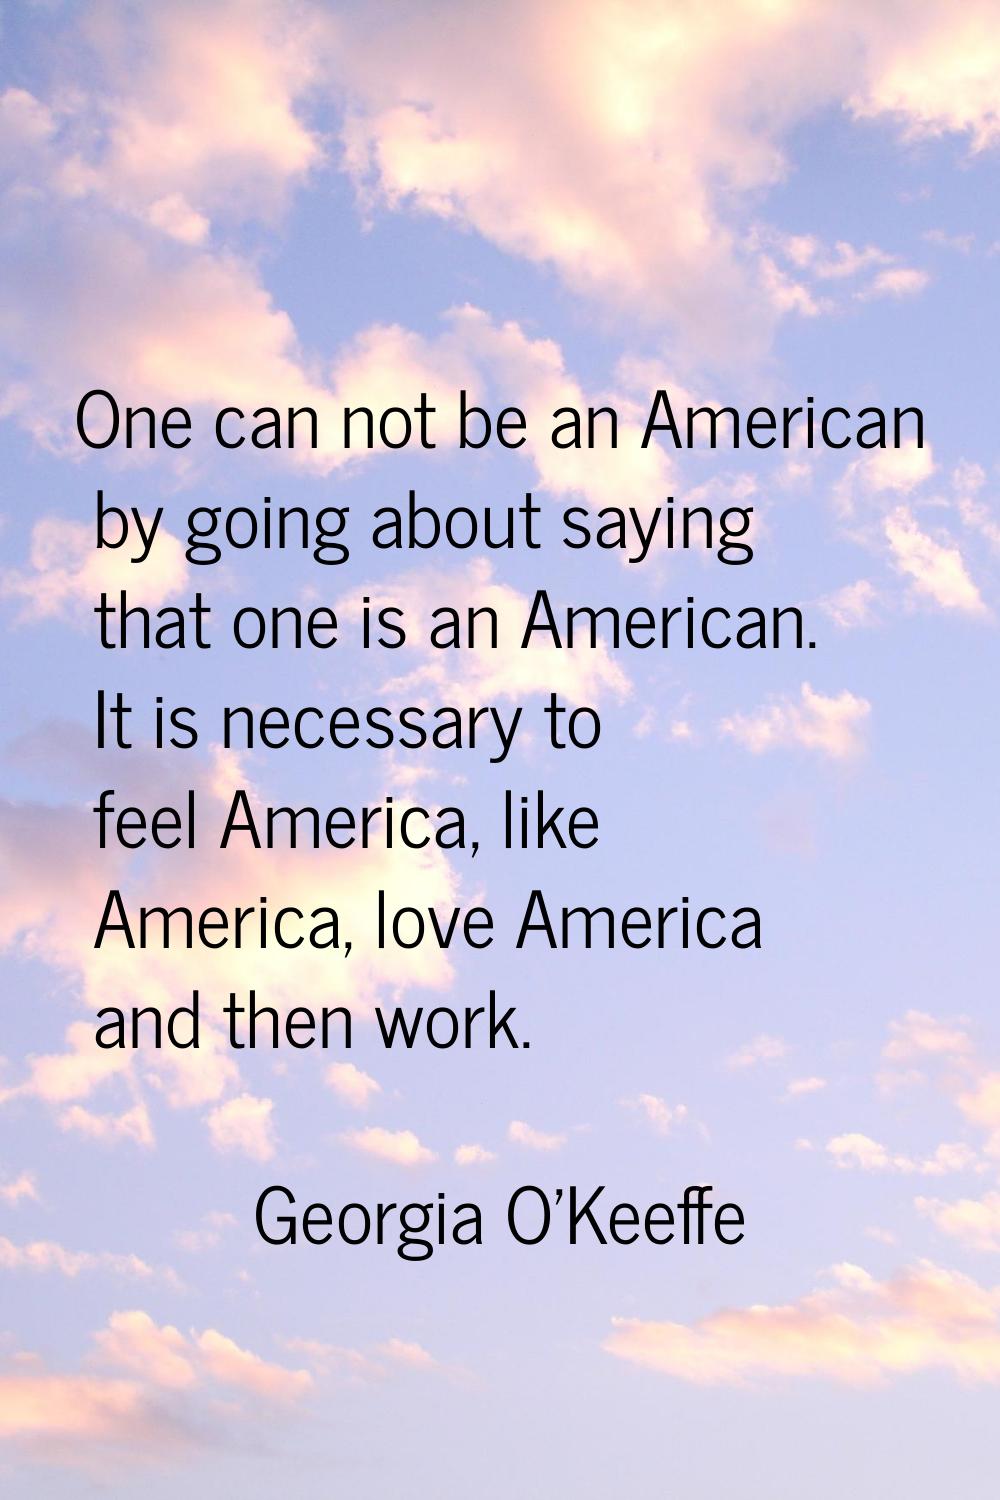 One can not be an American by going about saying that one is an American. It is necessary to feel A